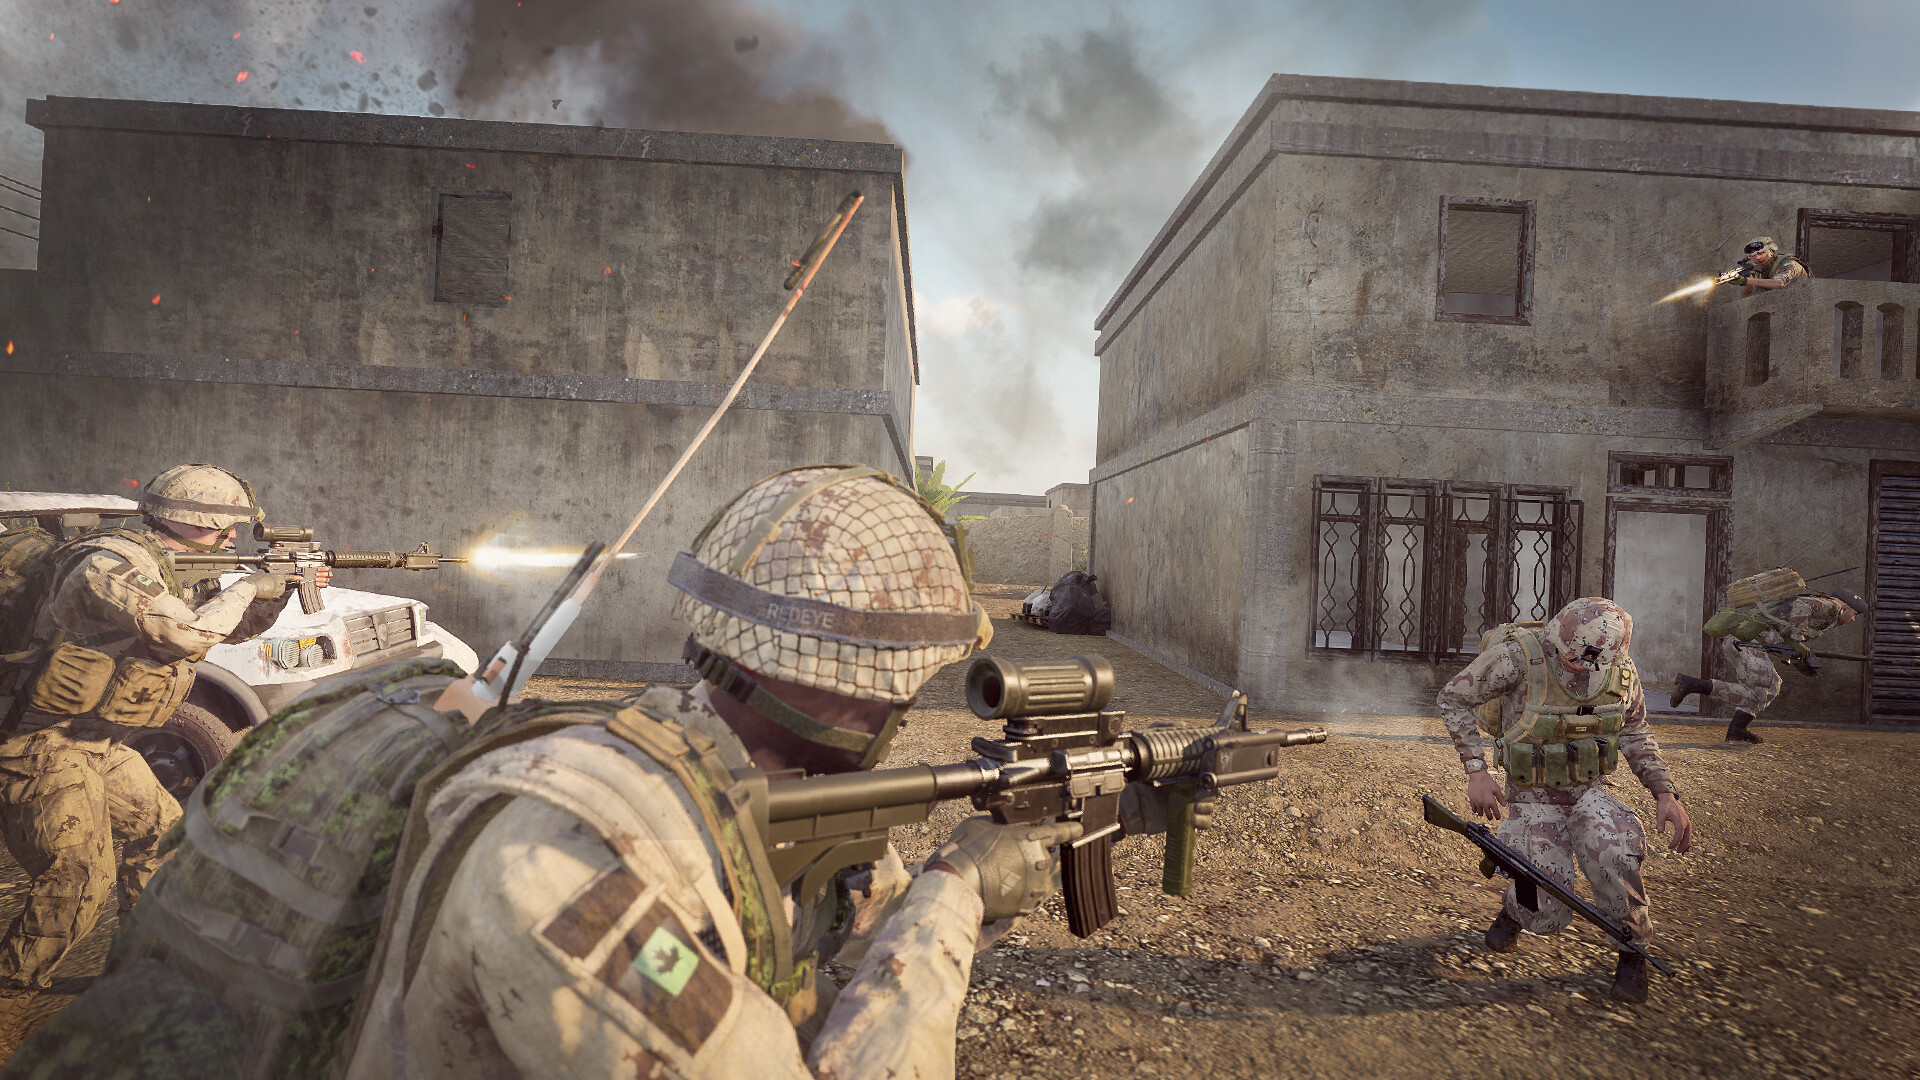 Free update adds competitive large-scale multiplayer mode to Arma 3